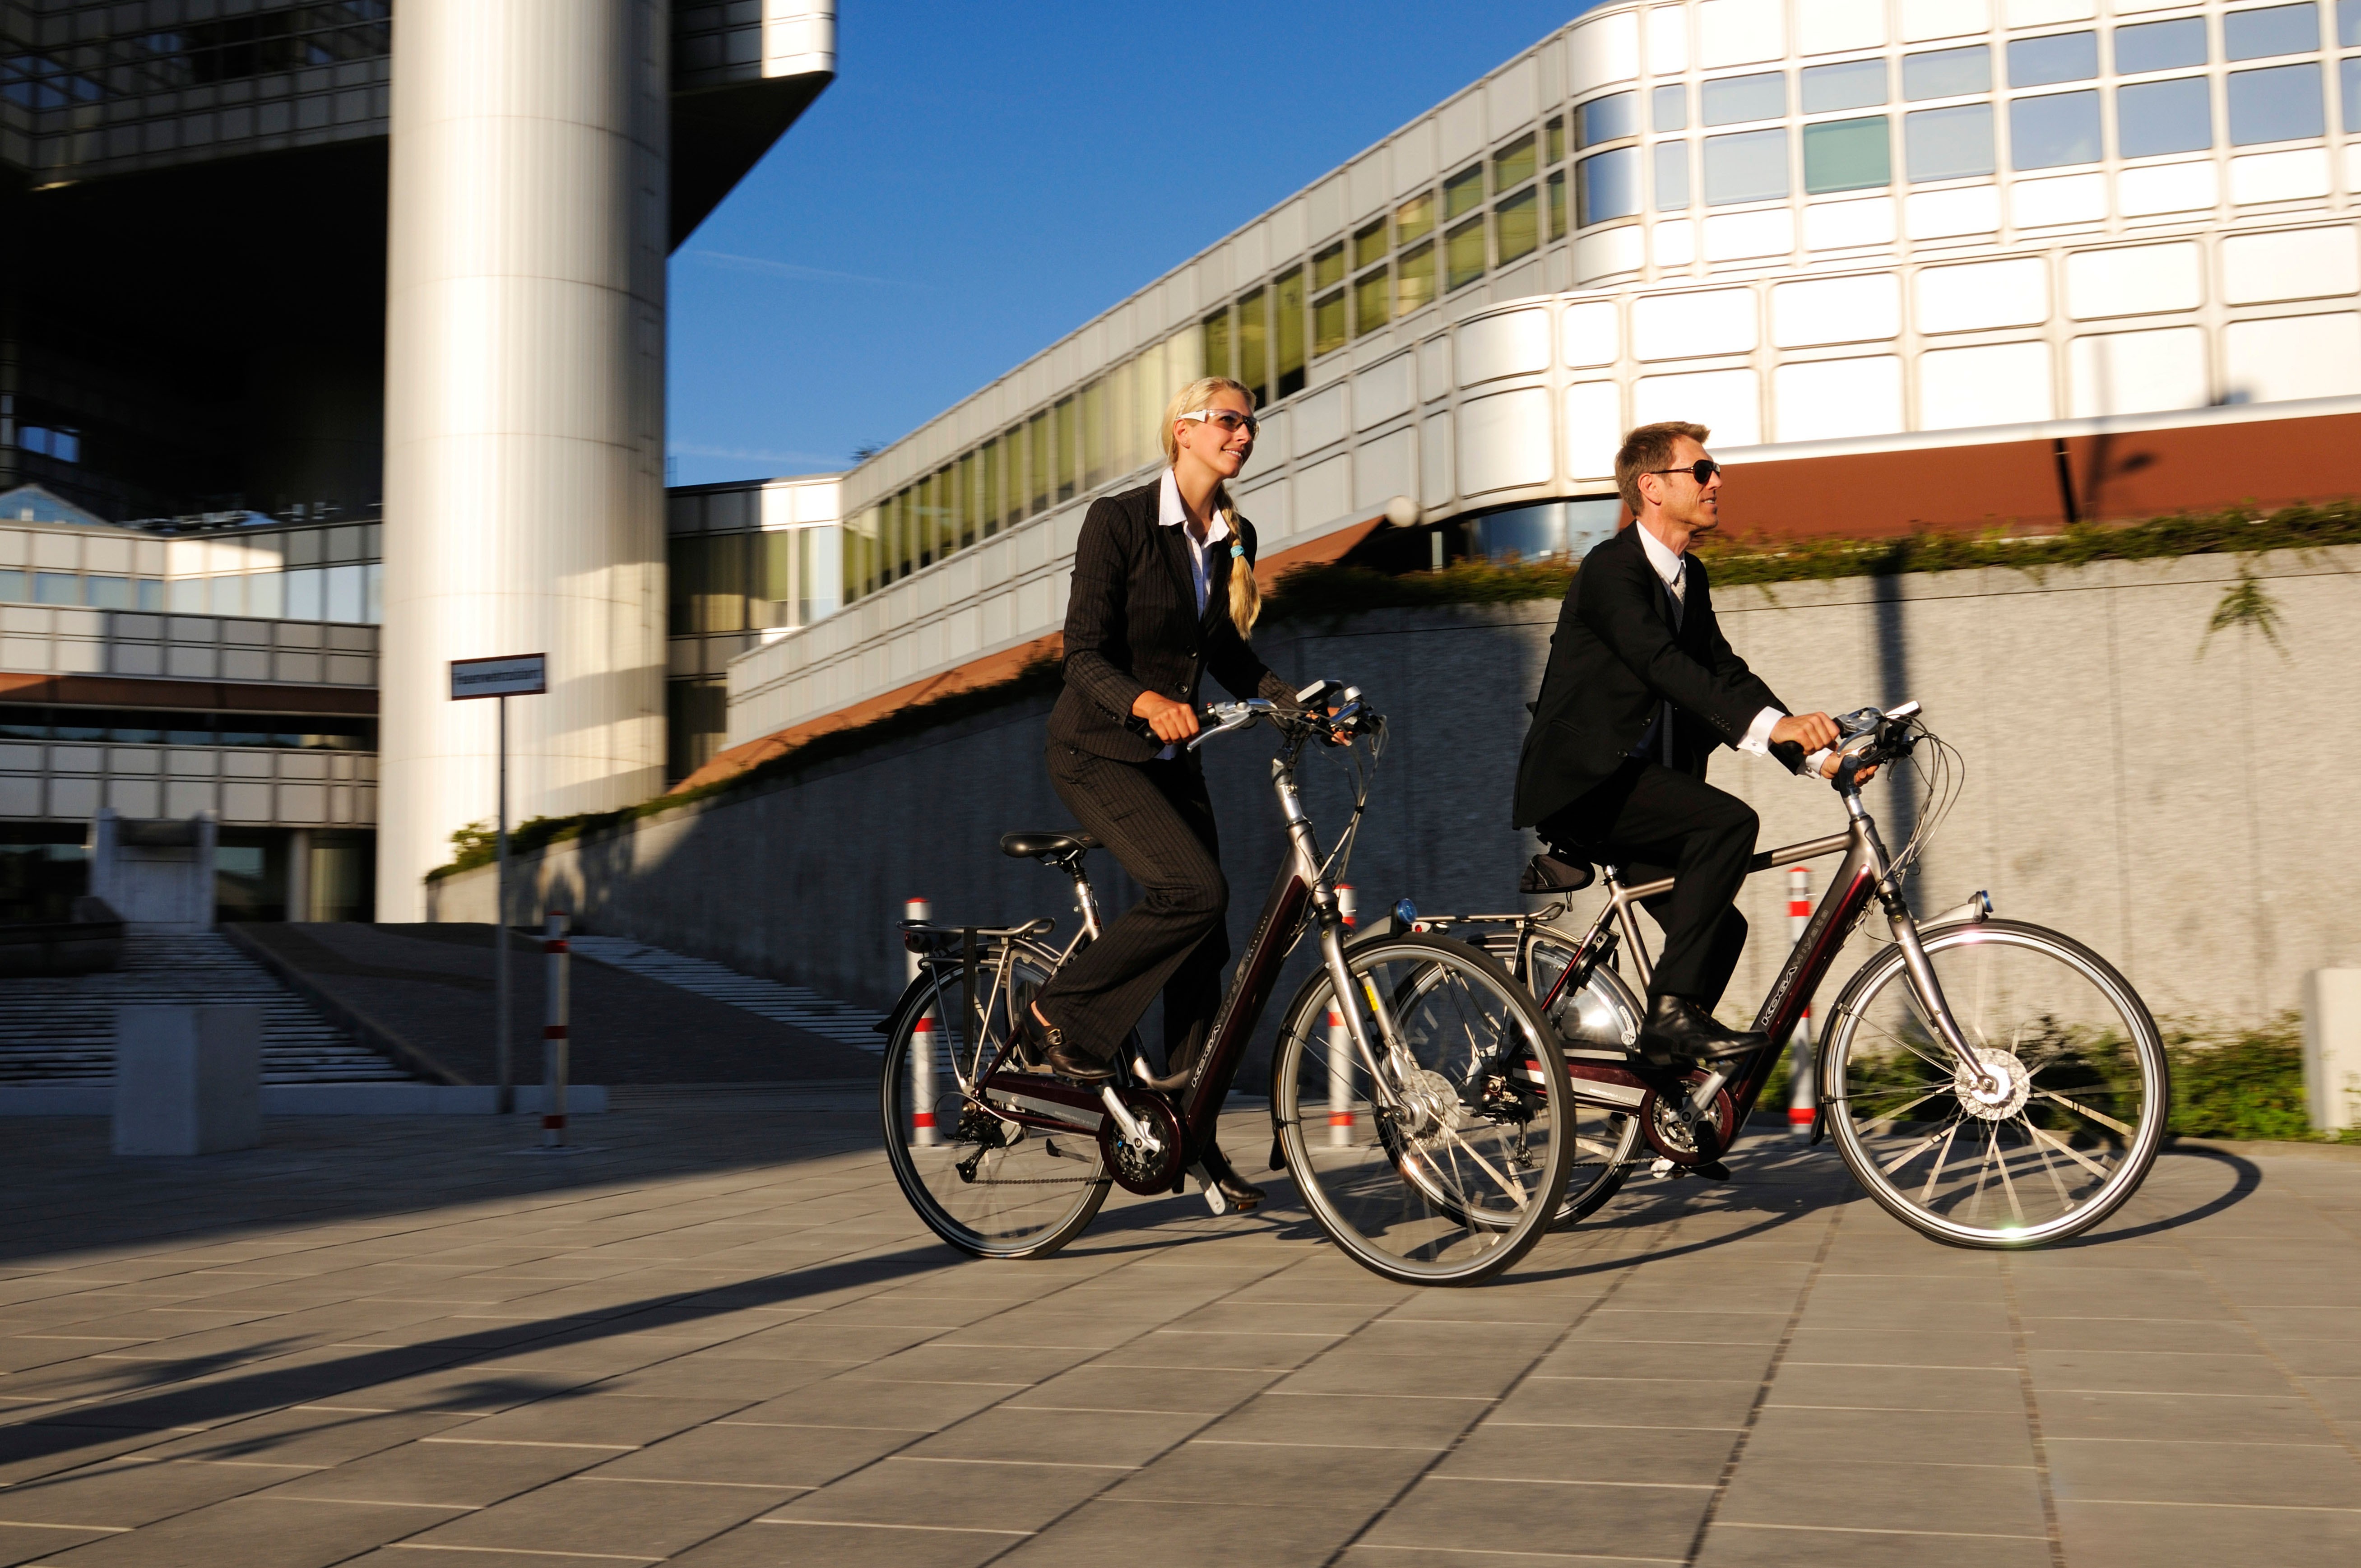 People ride on electric bicycles in Munich, Germany. Photo: Alamy